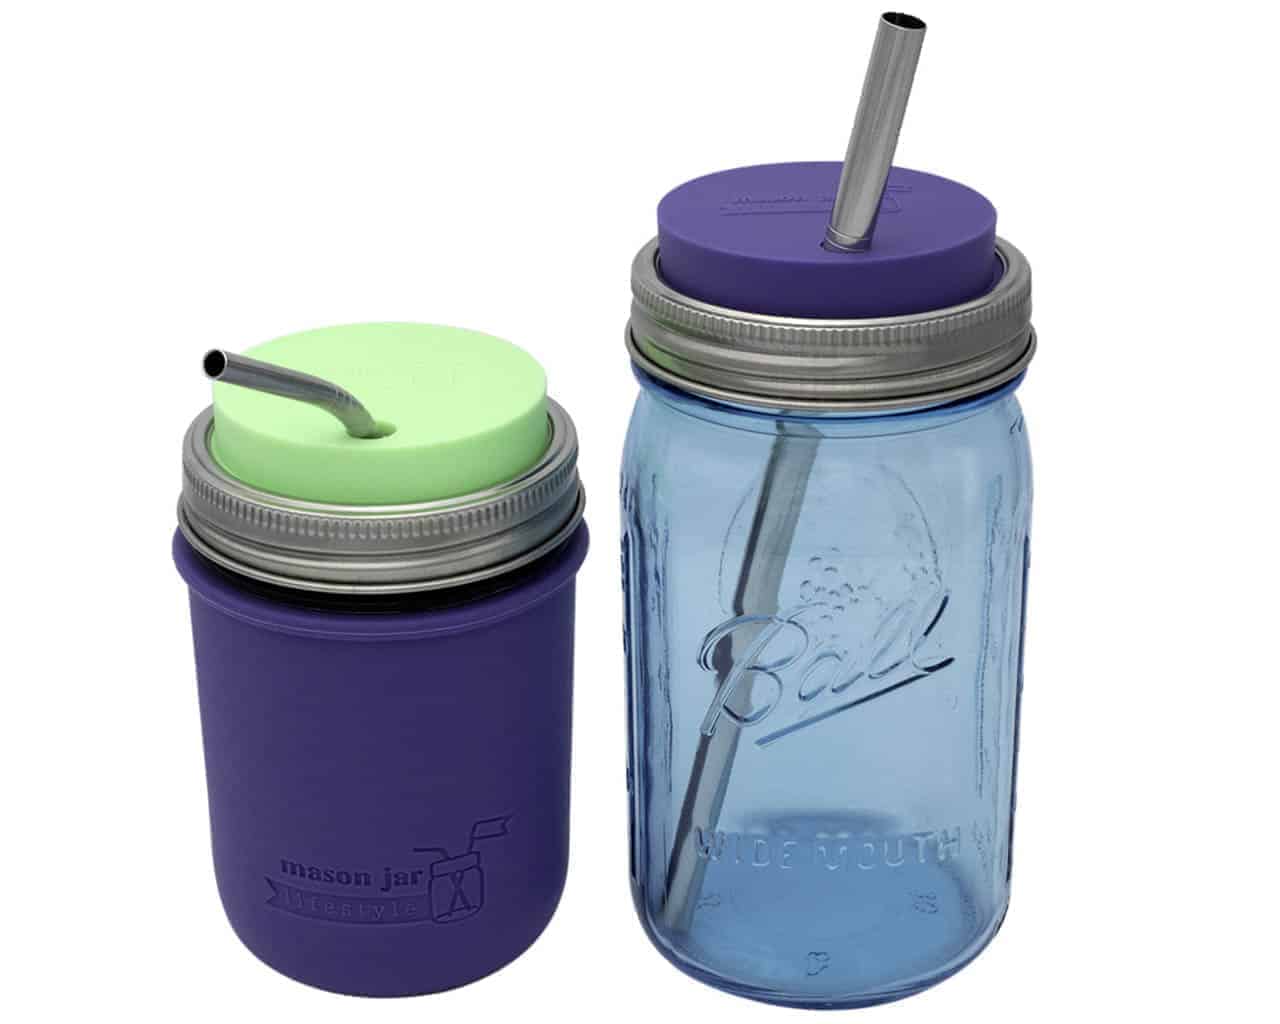 Silicone Straws Elk and Friends Wide Mouth Mason Jars Straw Lids Cleaning Brush Great for Kids & Adult Drinks Plastic Lids with Straw Hole No Rust BPA Free 4 Pack Reusable